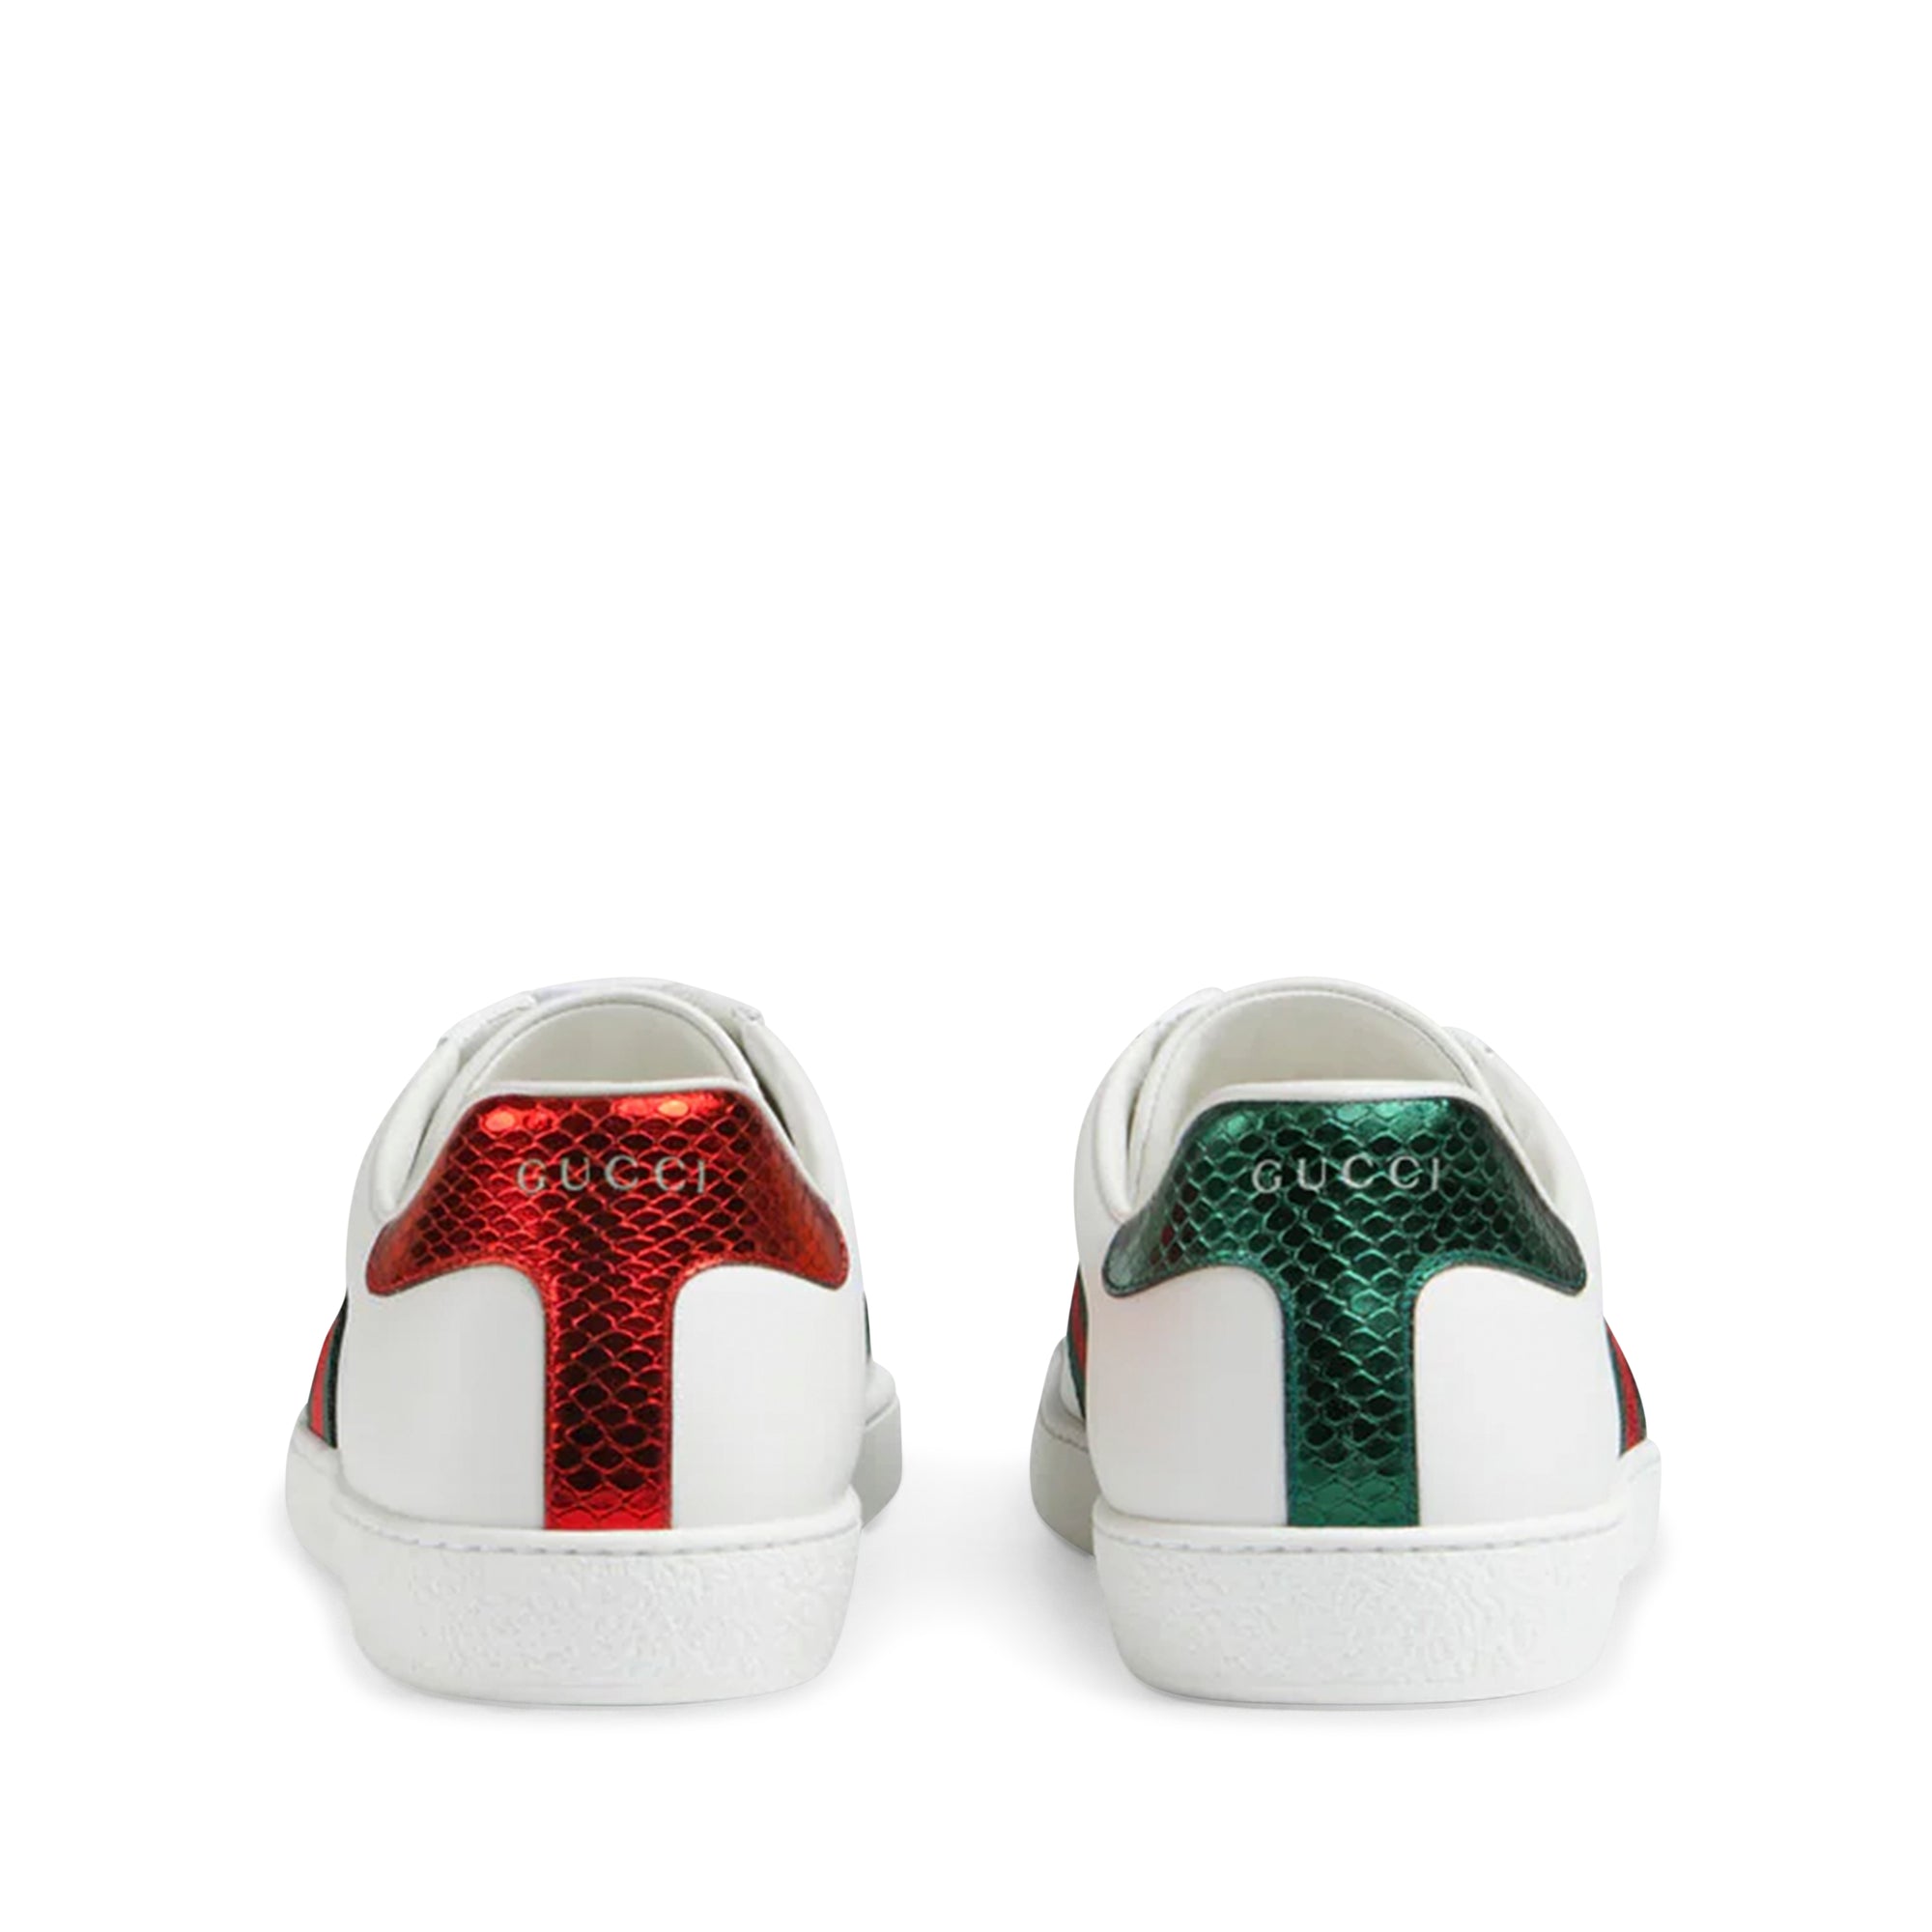 Gucci, Shoes, Gucci Mens Ace Embroidered Sneaker Snake